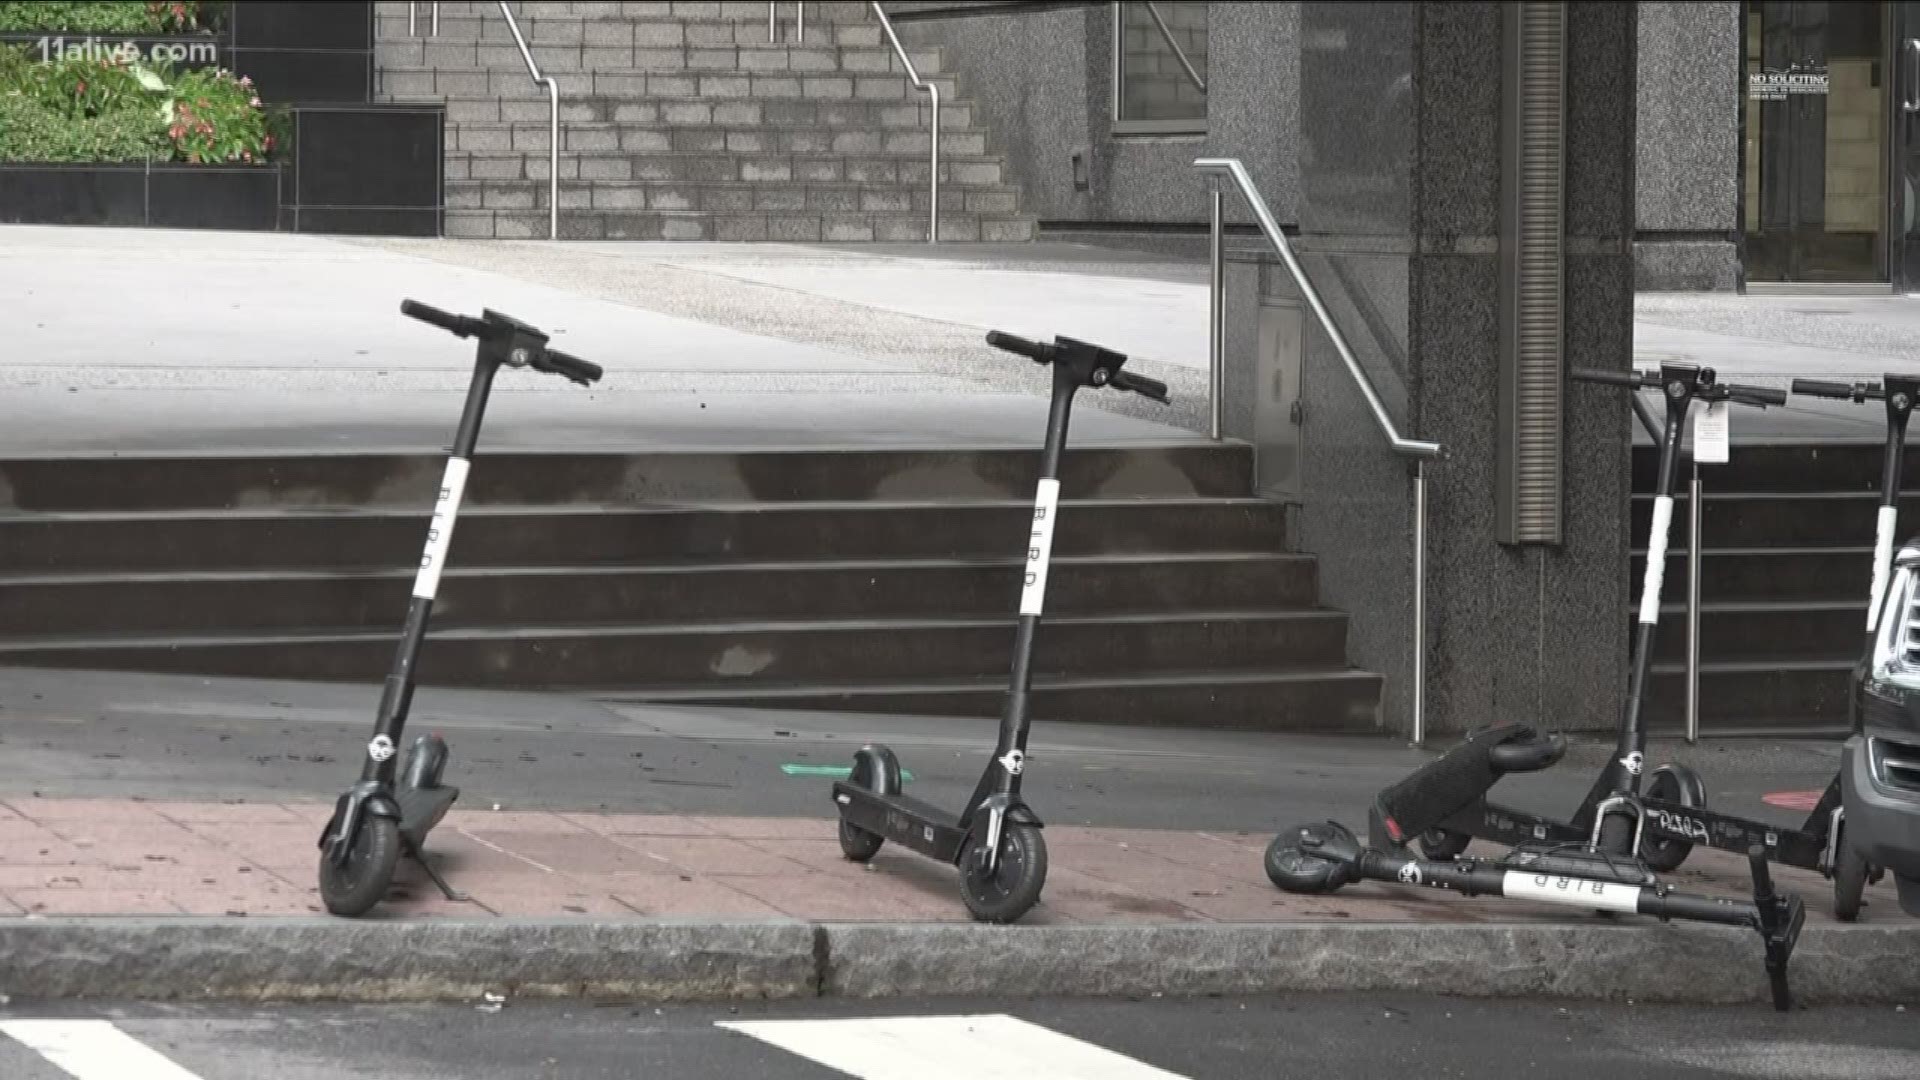 Under the proposal, any permits previously granted would be allowed to continue to operate, but there's no word if this is the death knell for scooters in Atlanta.